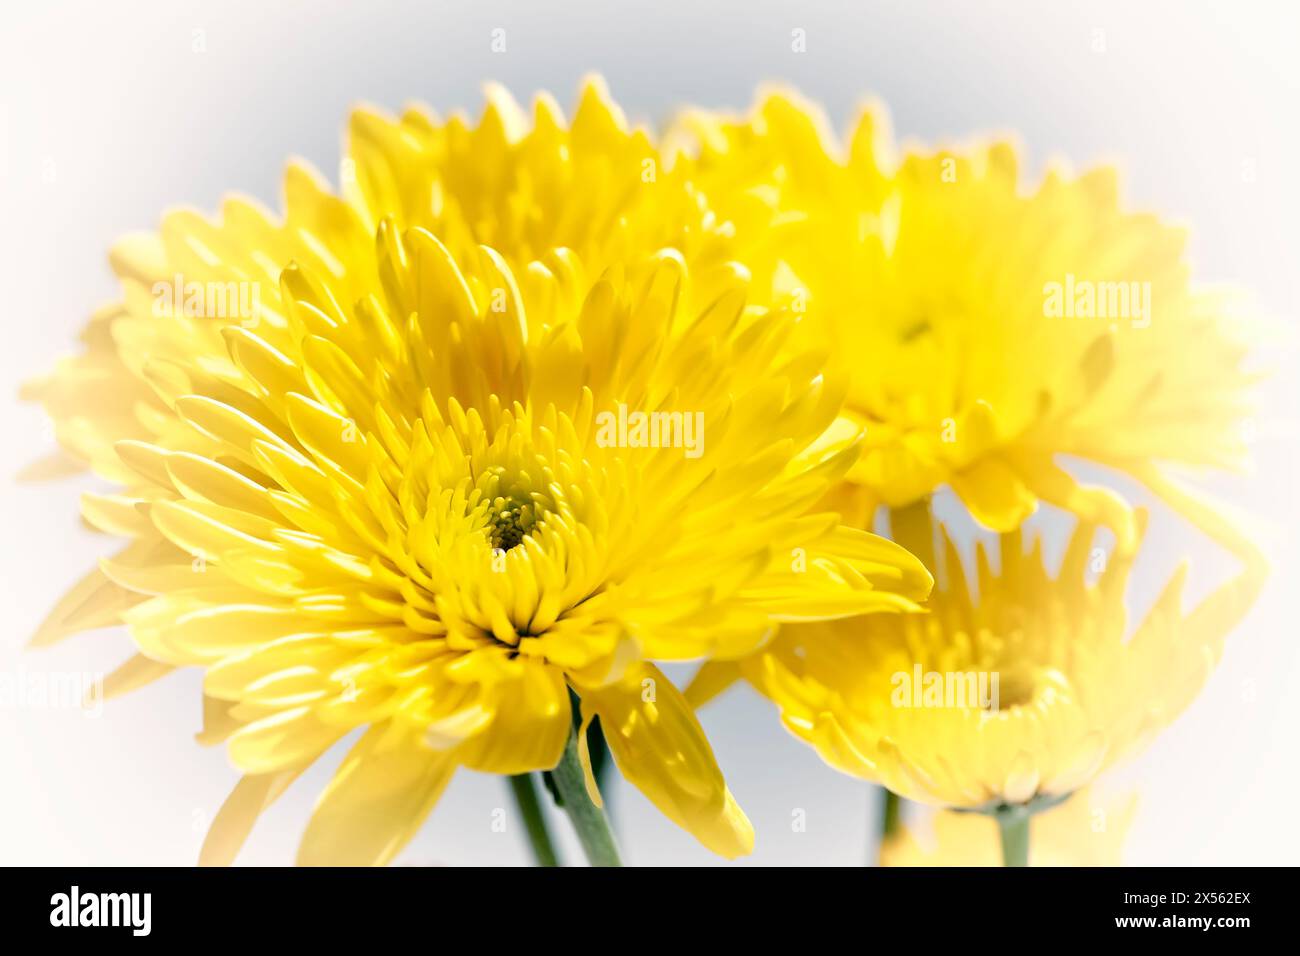 Group of yellow chrysanthemum flowers, fresh and blooming on a soft white background Stock Photo